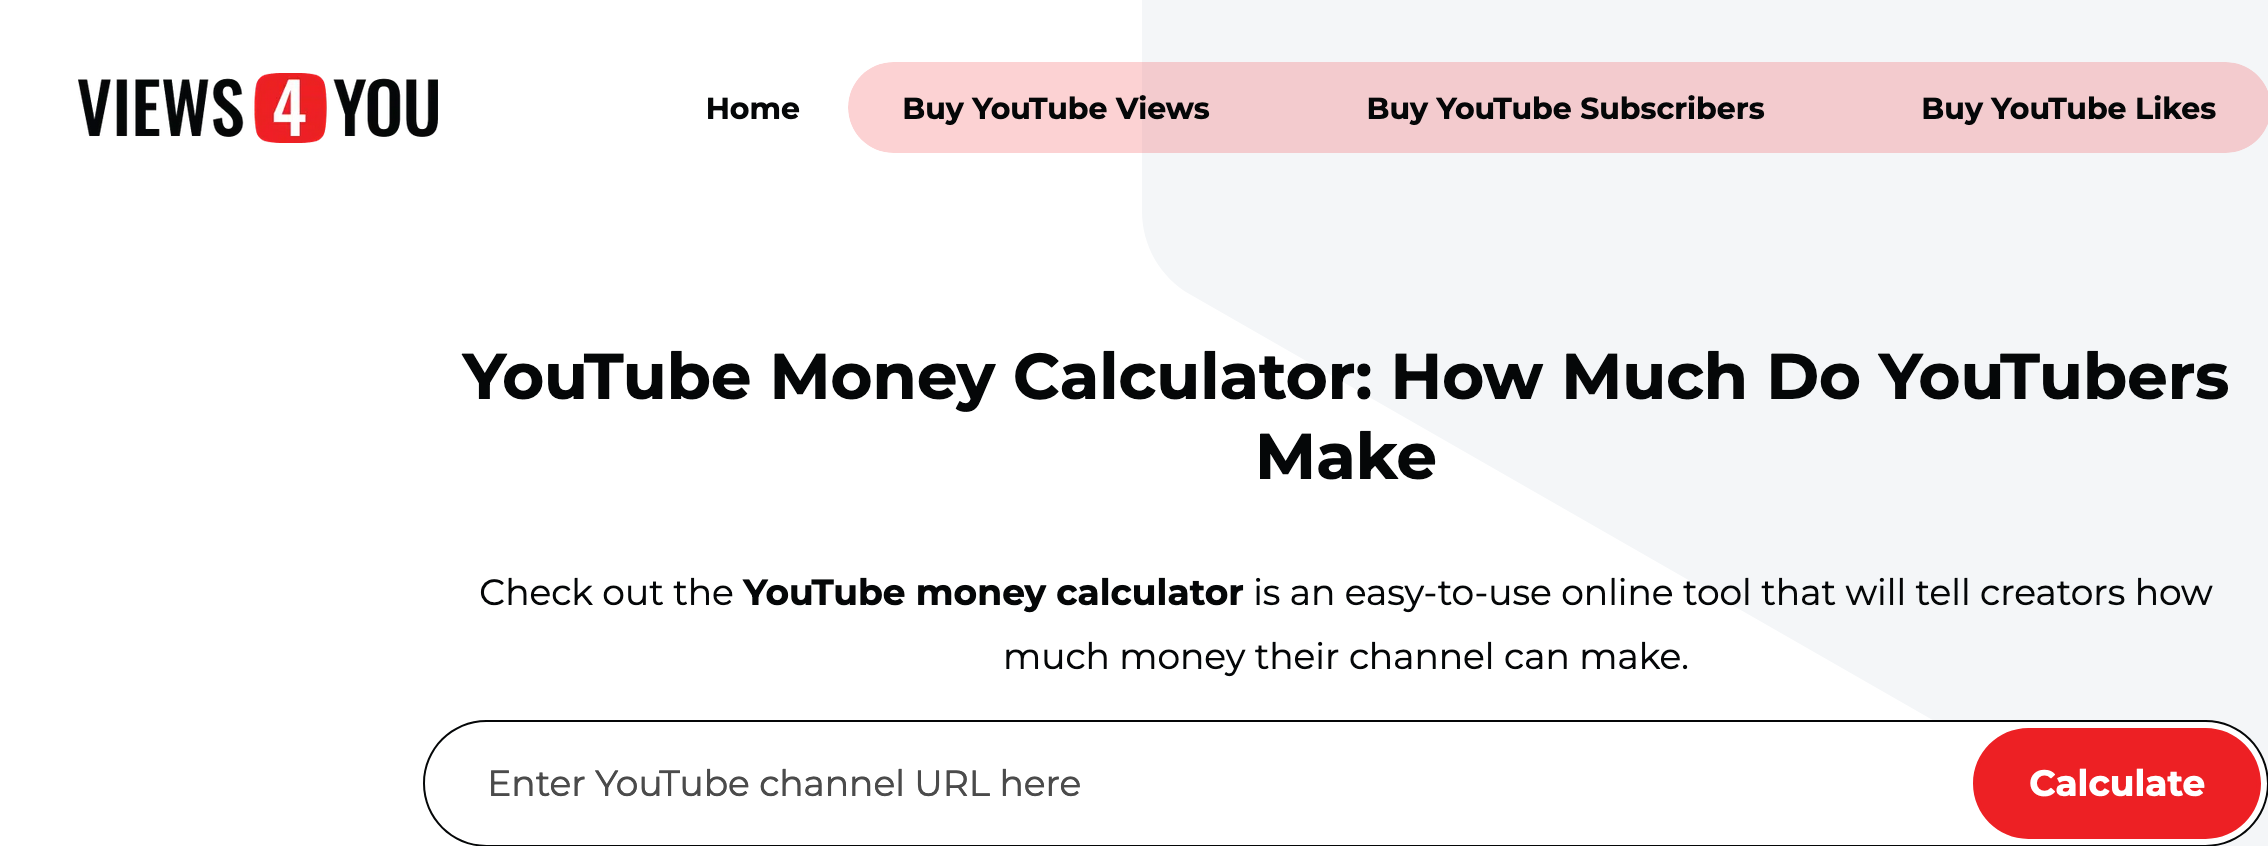 startuptile YouTube Money Calculator by Views4You-Tool to calculate how much money YouTubers make